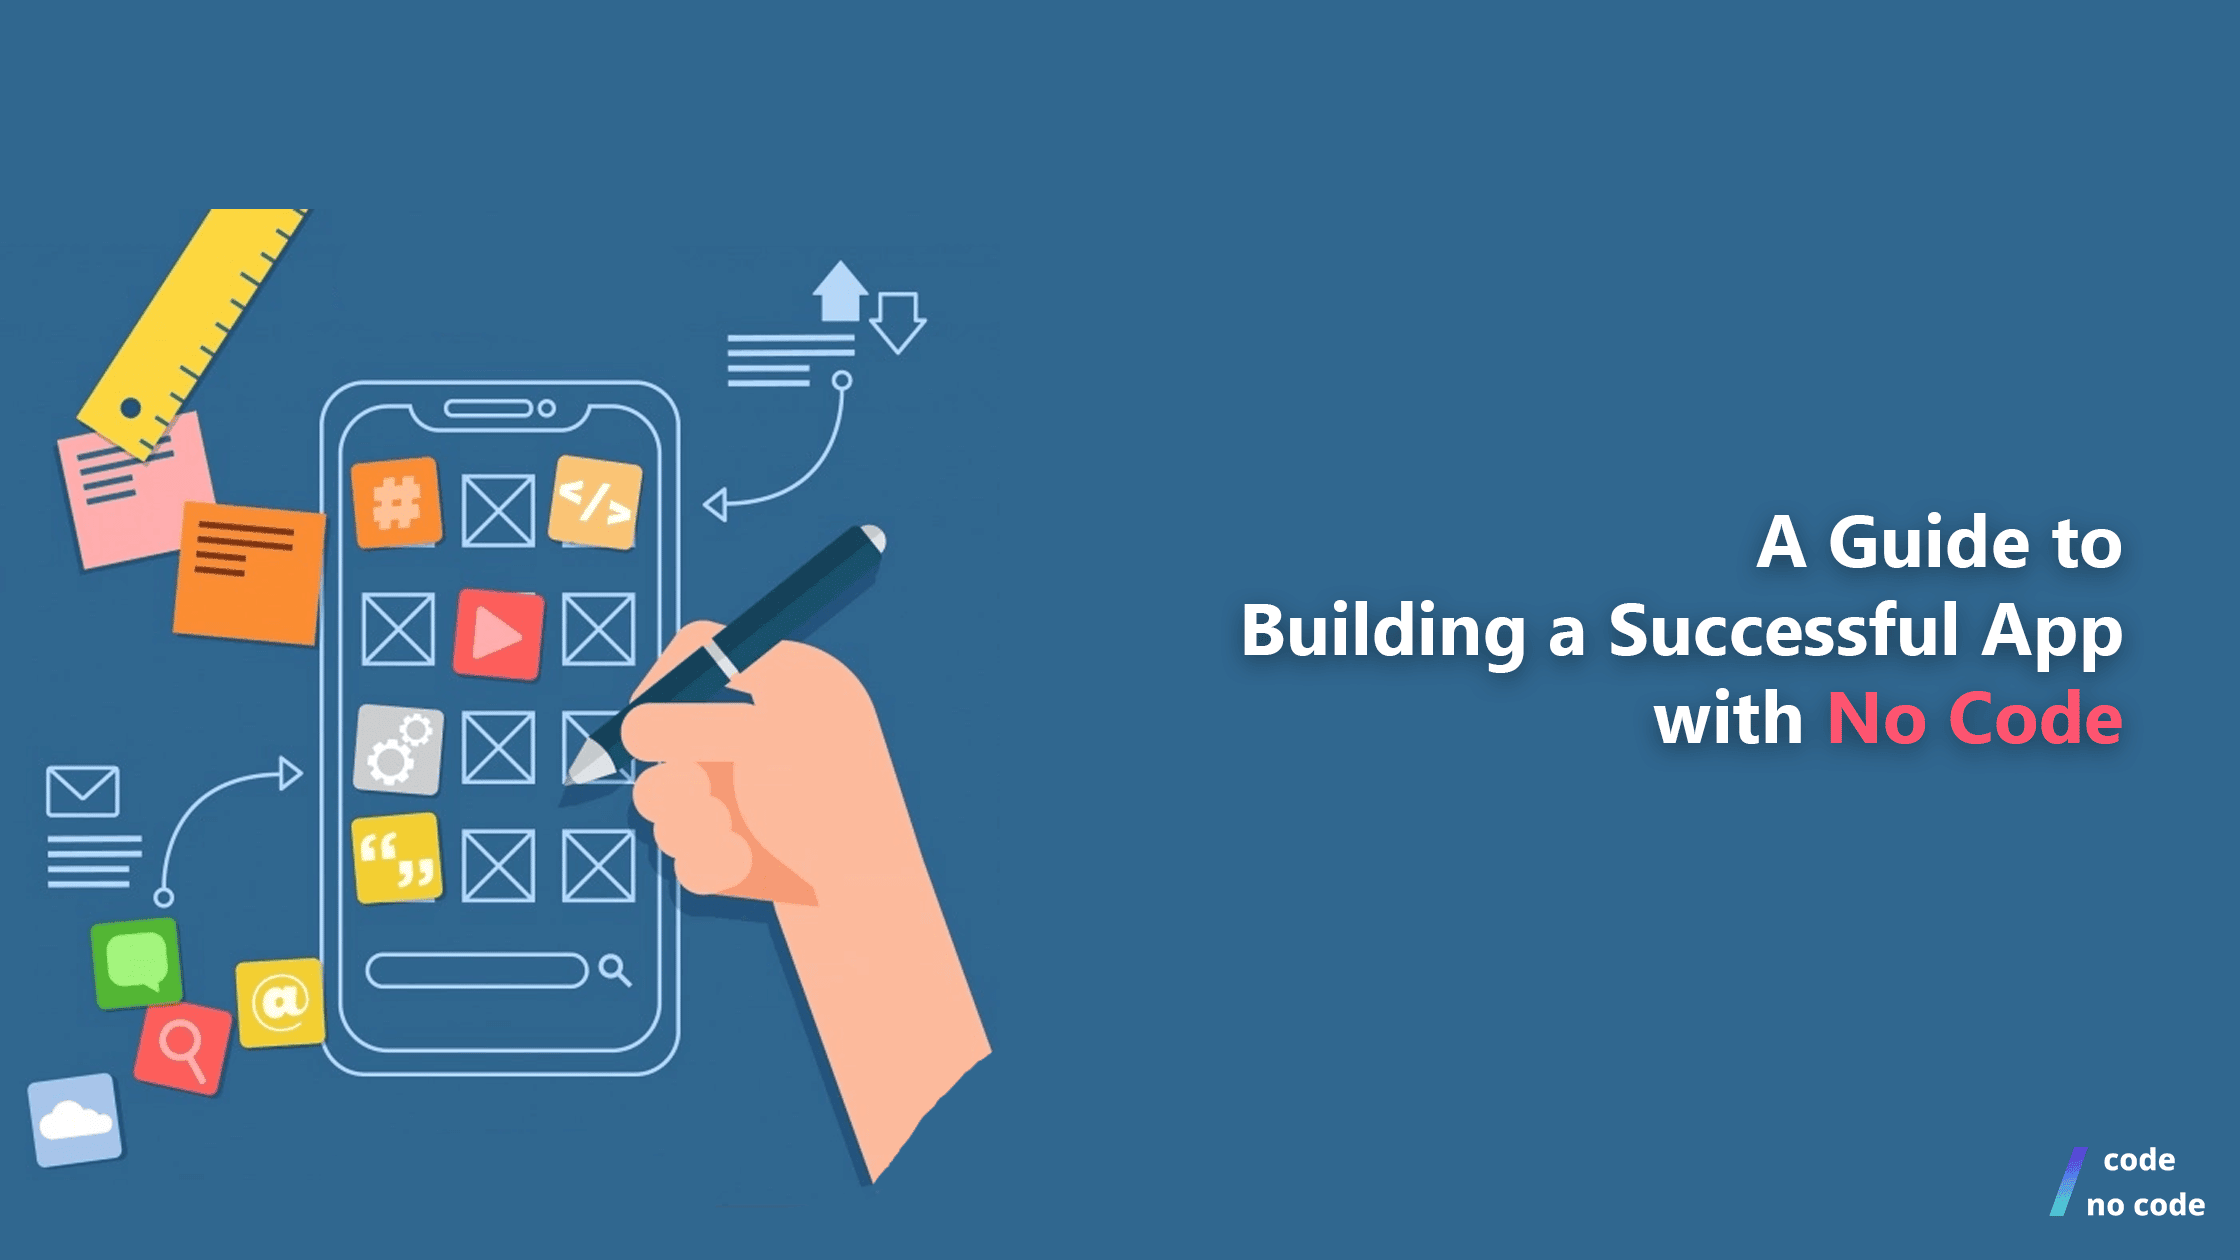 a hand drawing on a mobile screen and text "A Guide to Building a Successful App with No Code"